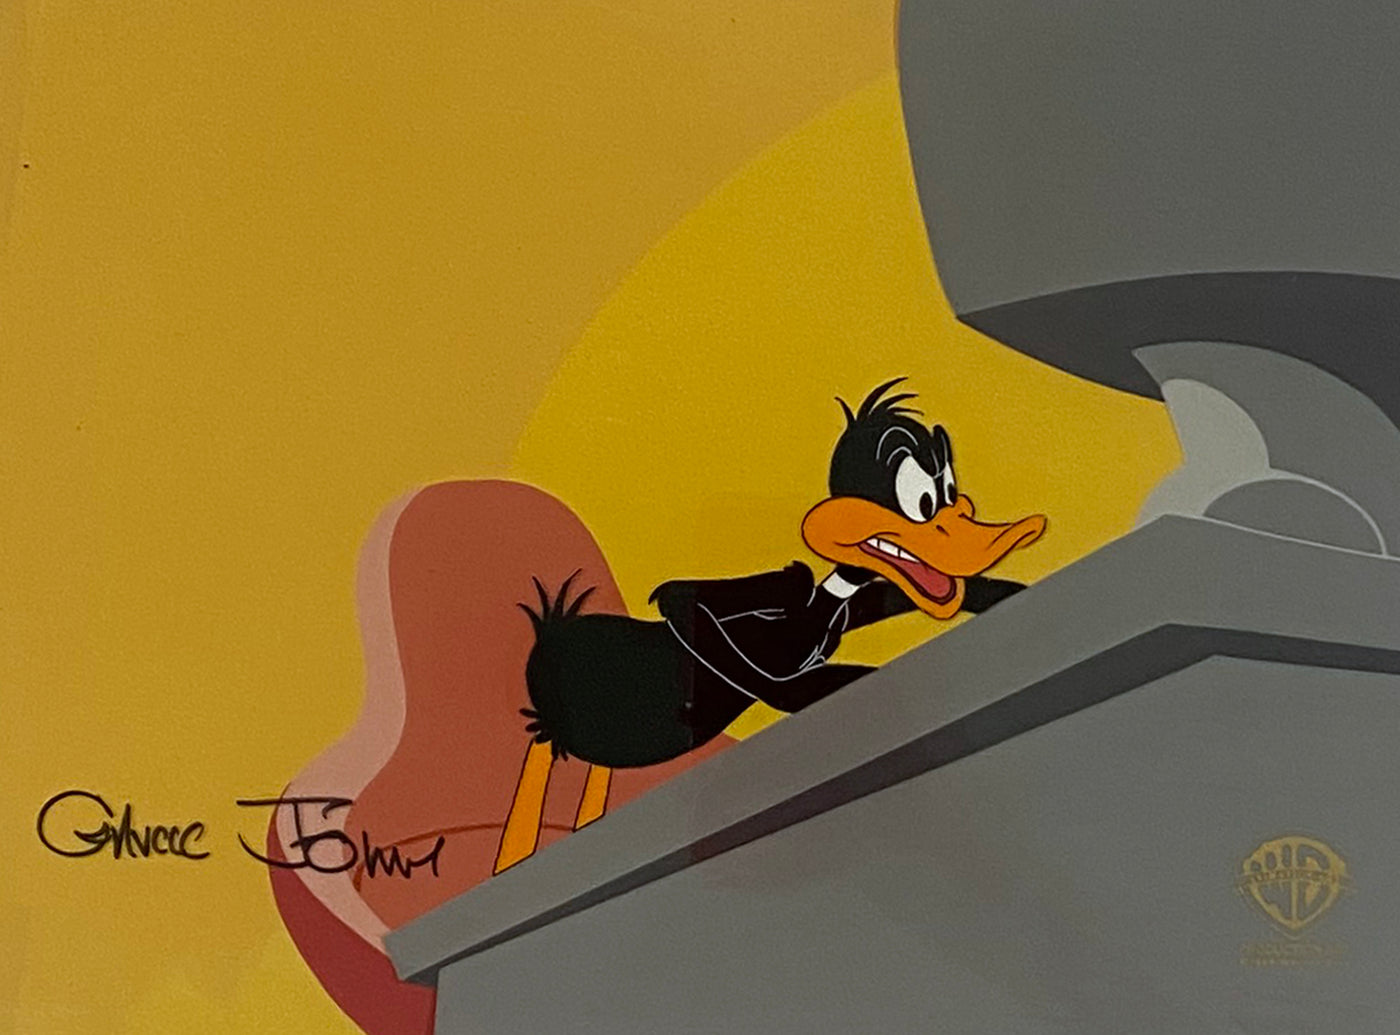 Original Warner Brothers Production Cel from "Gremlins 2" main title sequence featuring Daffy Duck, Signed by Chuck Jones